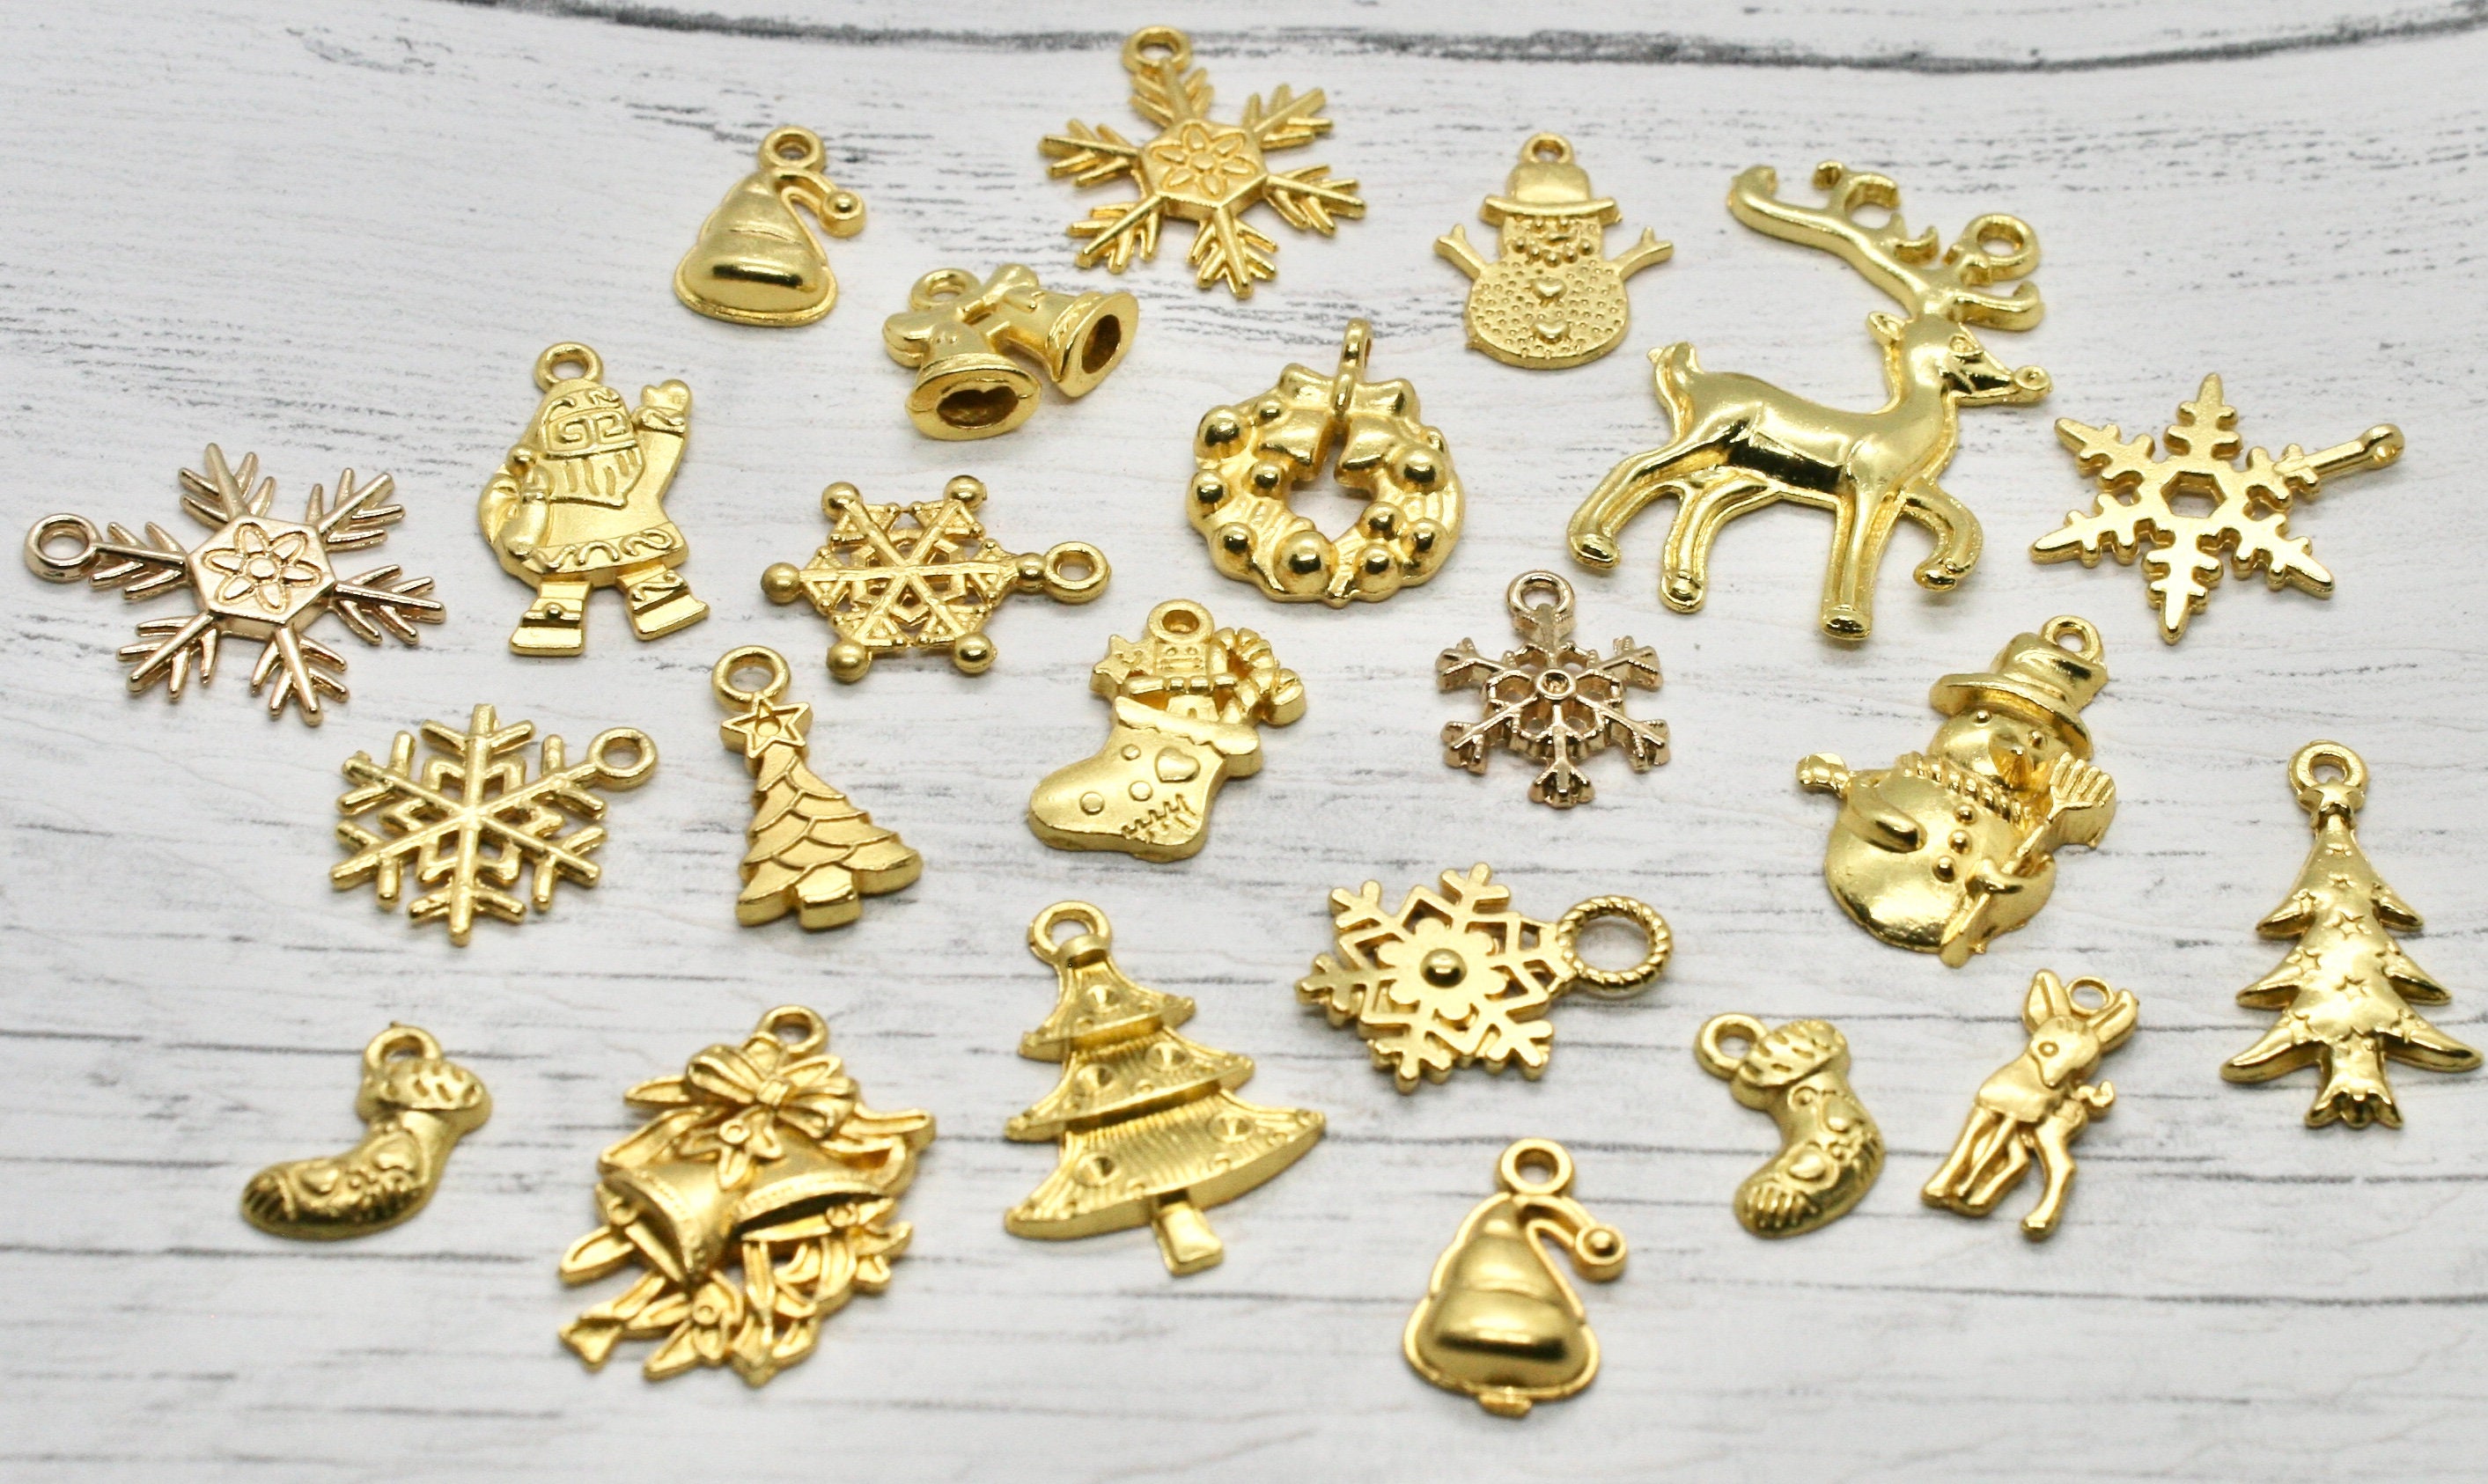 10 Mixed Charms for Necklace Charms Pendants - Sexy Sparkles